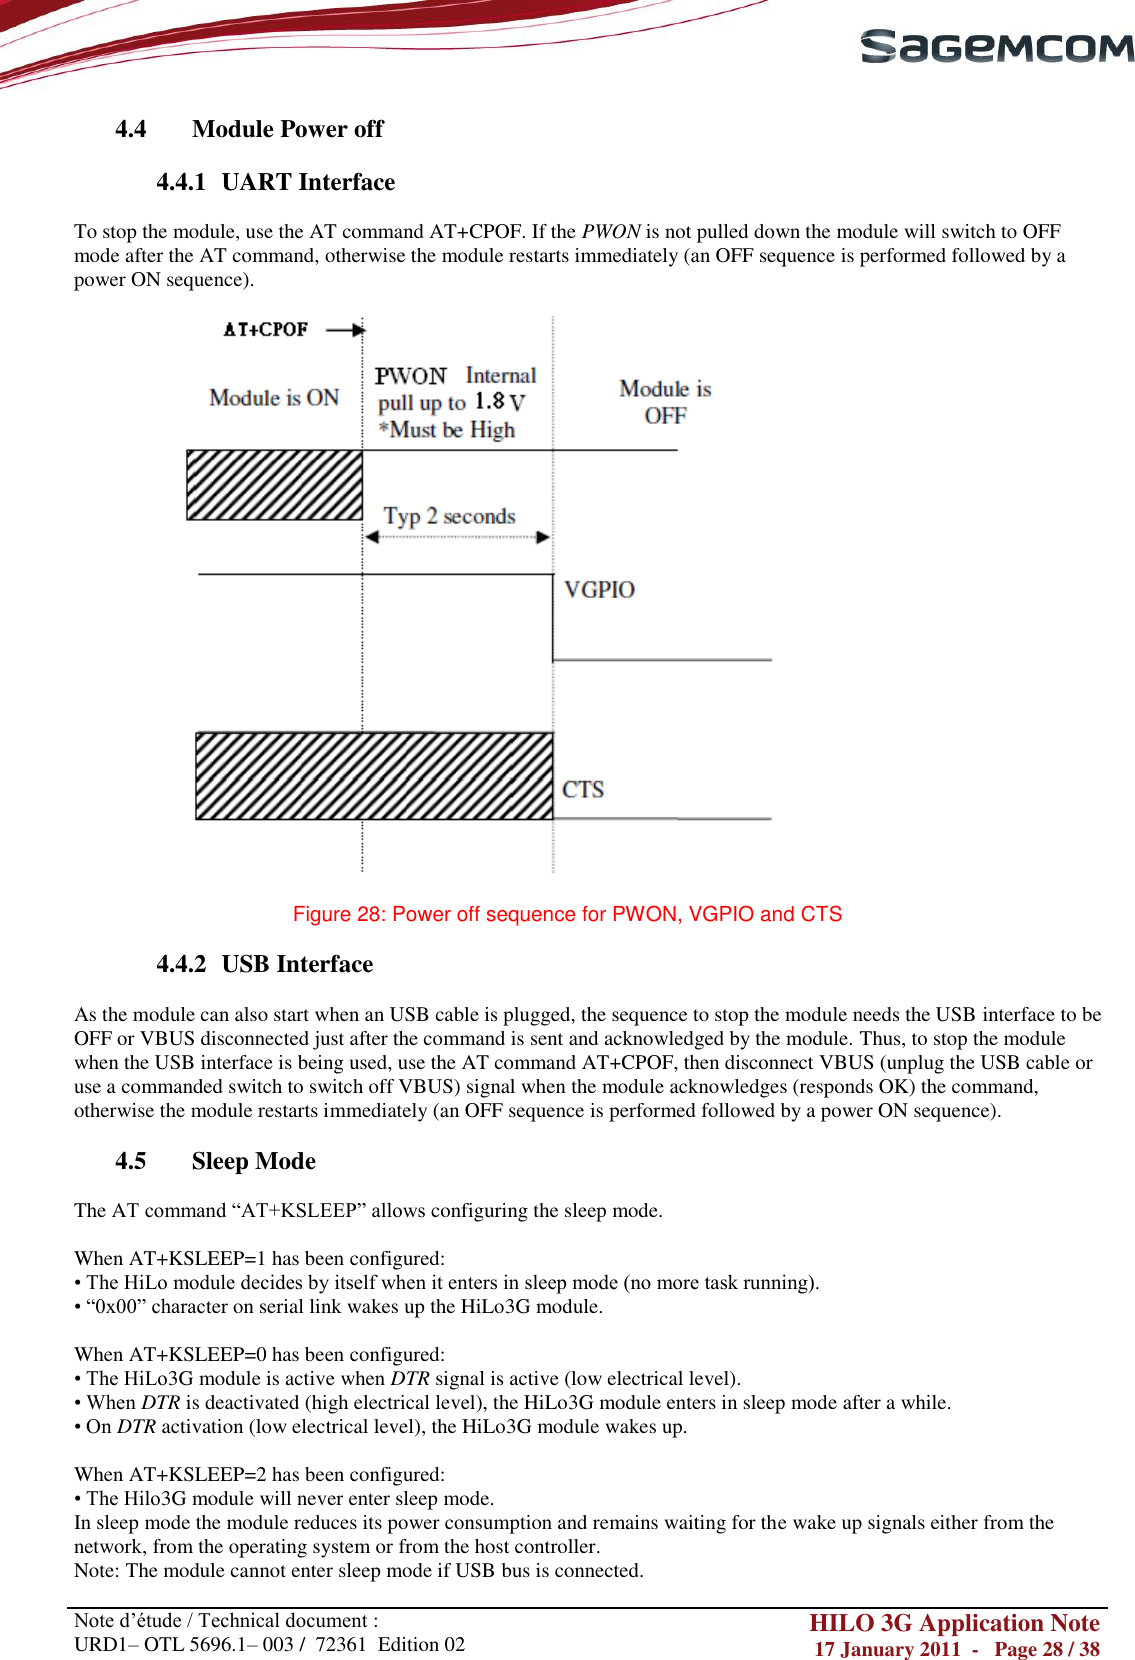       Note d‘étude / Technical document : URD1– OTL 5696.1– 003 /  72361  Edition 02 HILO 3G Application Note 17 January 2011  -   Page 28 / 38    4.4 Module Power off  4.4.1 UART Interface  To stop the module, use the AT command AT+CPOF. If the PWON is not pulled down the module will switch to OFF mode after the AT command, otherwise the module restarts immediately (an OFF sequence is performed followed by a power ON sequence).    Figure 28: Power off sequence for PWON, VGPIO and CTS  4.4.2 USB Interface  As the module can also start when an USB cable is plugged, the sequence to stop the module needs the USB interface to be OFF or VBUS disconnected just after the command is sent and acknowledged by the module. Thus, to stop the module when the USB interface is being used, use the AT command AT+CPOF, then disconnect VBUS (unplug the USB cable or use a commanded switch to switch off VBUS) signal when the module acknowledges (responds OK) the command, otherwise the module restarts immediately (an OFF sequence is performed followed by a power ON sequence).  4.5 Sleep Mode  The AT command ―AT+KSLEEP‖ allows configuring the sleep mode.  When AT+KSLEEP=1 has been configured: • The HiLo module decides by itself when it enters in sleep mode (no more task running). • ―0x00‖ character on serial link wakes up the HiLo3G module.  When AT+KSLEEP=0 has been configured: • The HiLo3G module is active when DTR signal is active (low electrical level). • When DTR is deactivated (high electrical level), the HiLo3G module enters in sleep mode after a while. • On DTR activation (low electrical level), the HiLo3G module wakes up.  When AT+KSLEEP=2 has been configured: • The Hilo3G module will never enter sleep mode. In sleep mode the module reduces its power consumption and remains waiting for the wake up signals either from the network, from the operating system or from the host controller. Note: The module cannot enter sleep mode if USB bus is connected. 